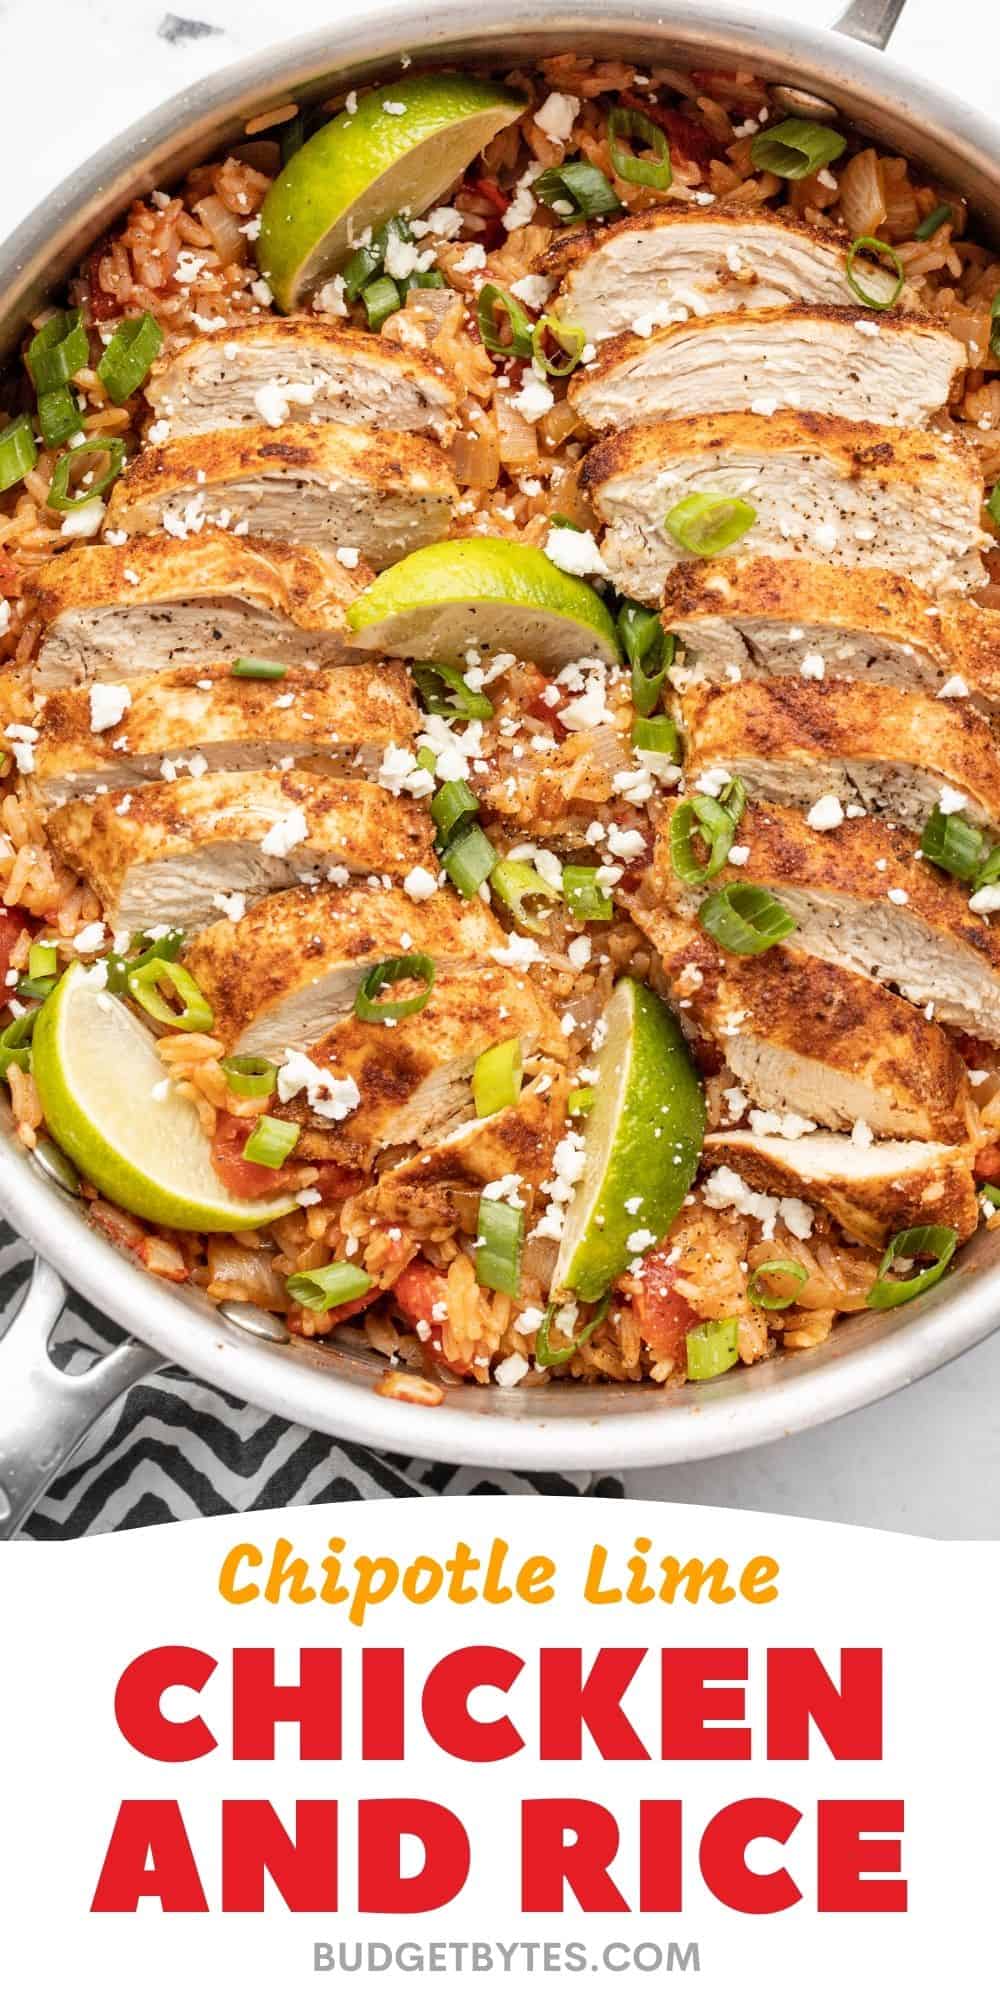 Chipotle Lime Chicken and Rice - One Pot! - Budget Bytes